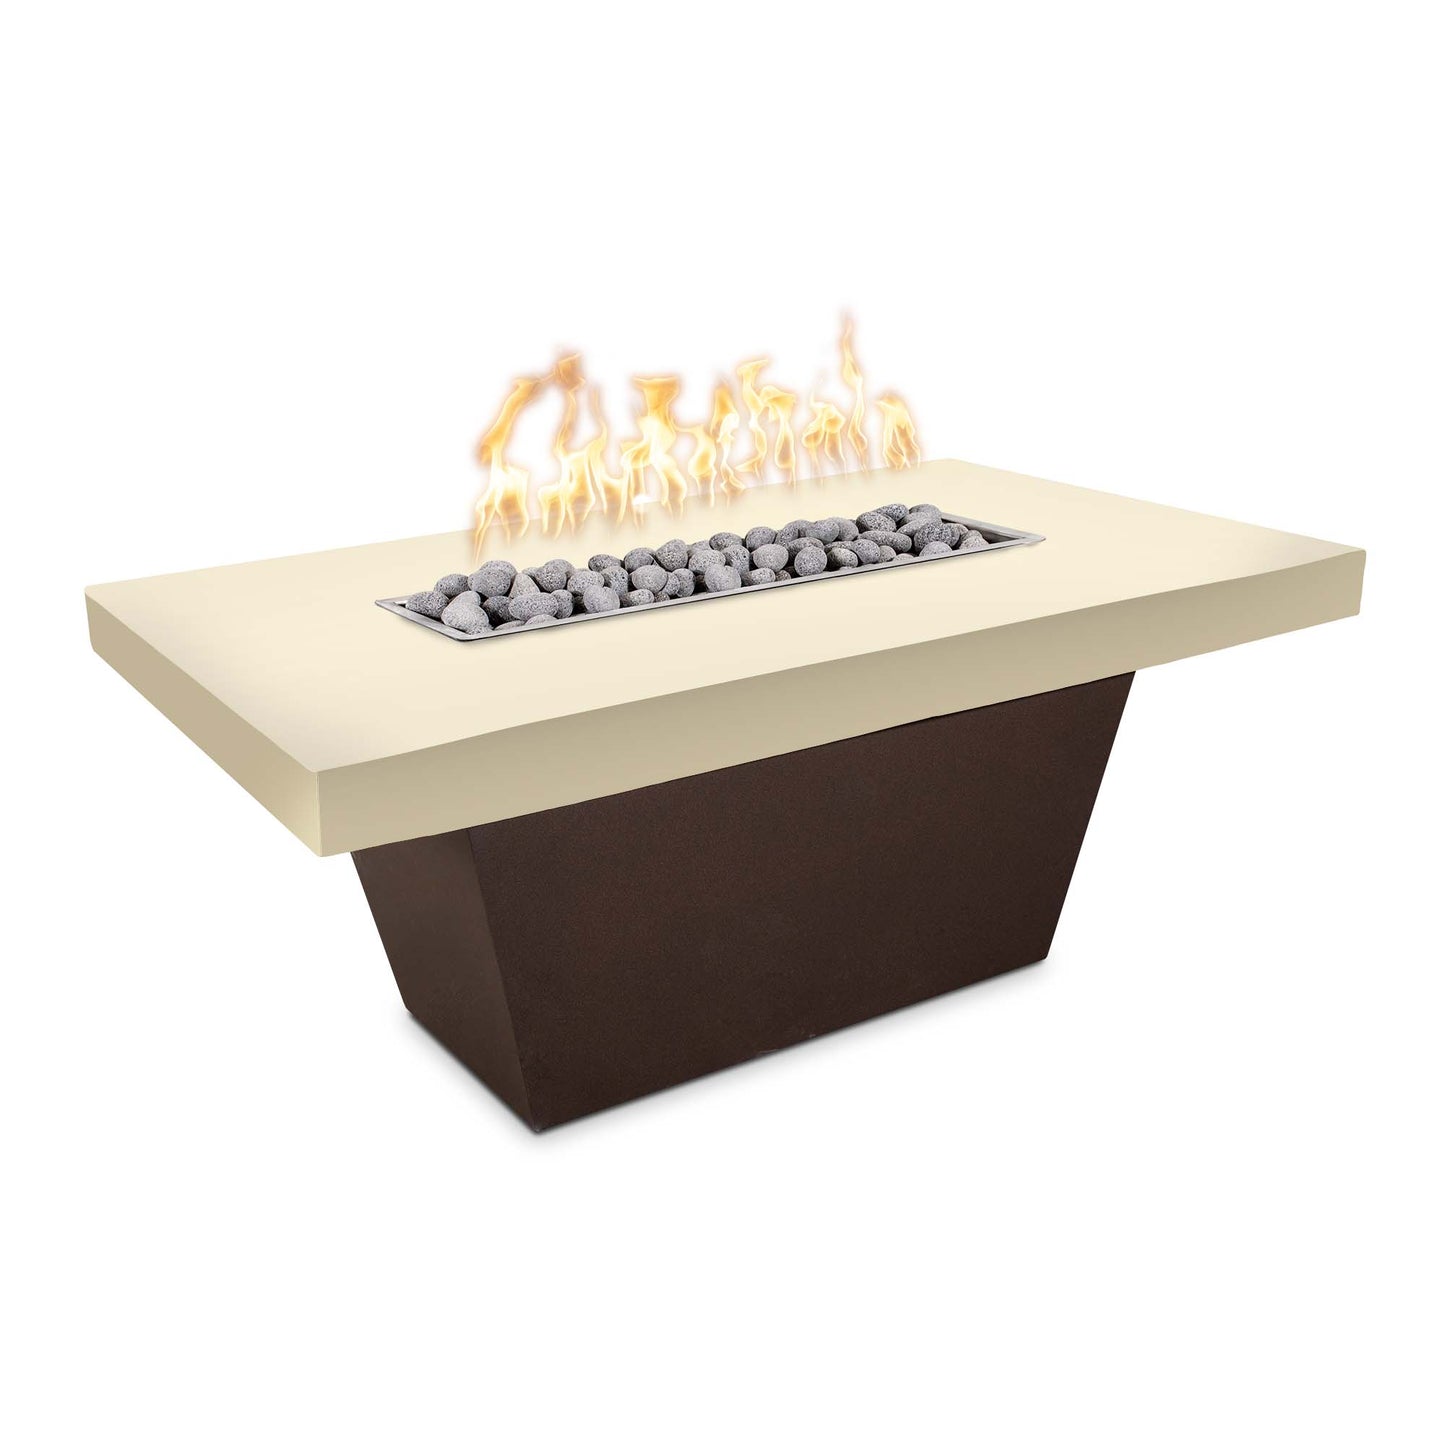 The Outdoor Plus Tacoma 48" Brown Concrete Top & Black Powder Coated Base Liquid Propane Fire Table with Match Lit Ignition